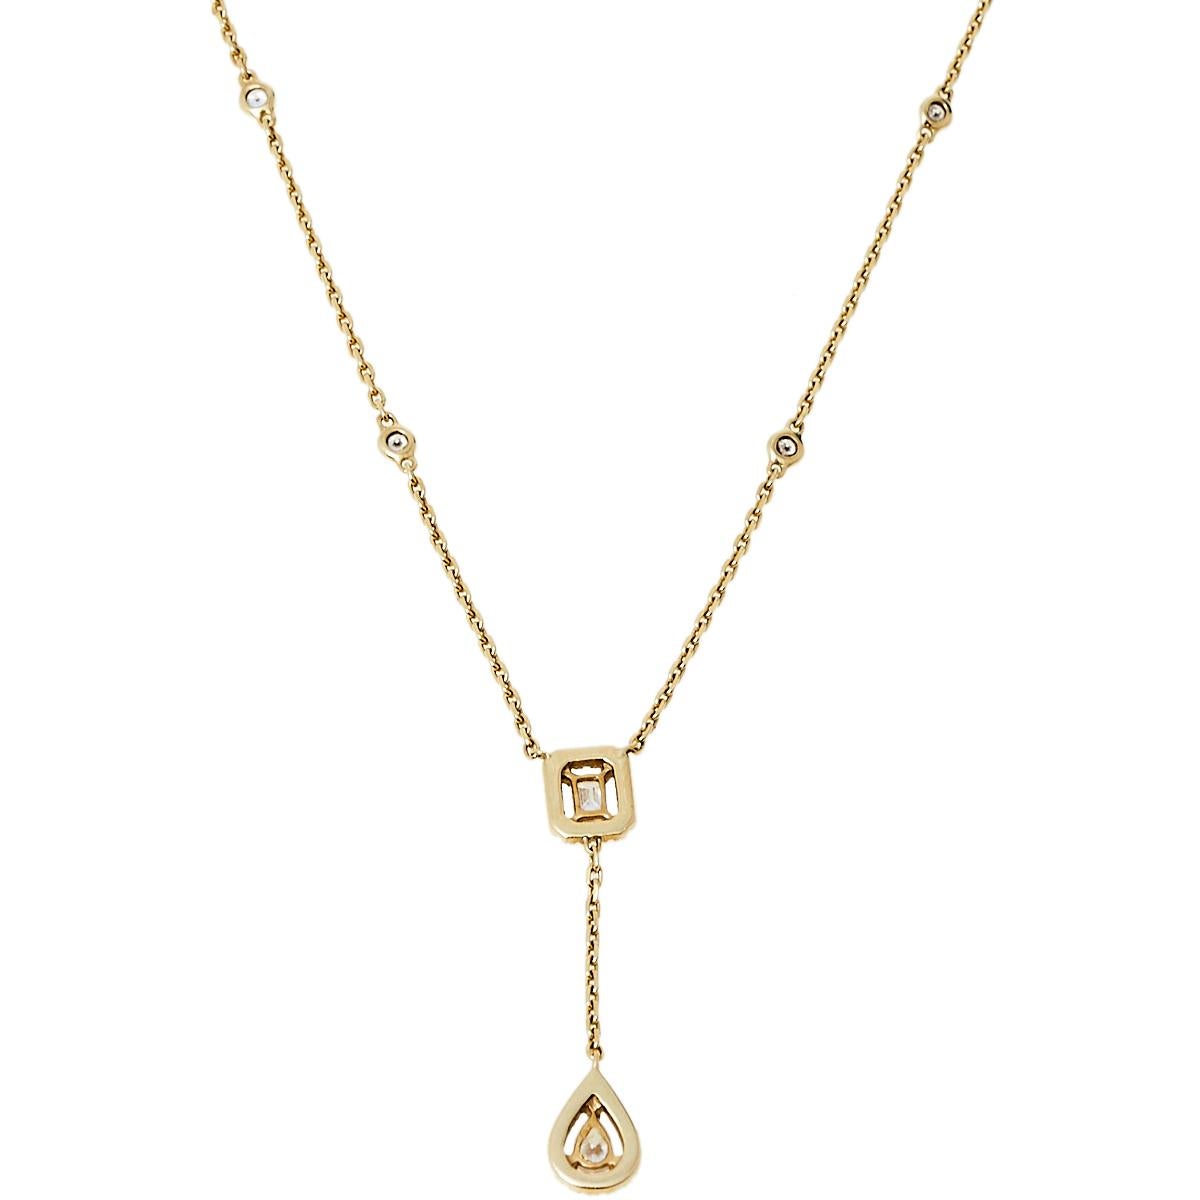 My Twin is a popular collection of house Messika. This beautiful necklace is fully handcrafted from 18k yellow gold into a minimal yet timeless tie silhouette exuding modern aesthetics and unparalleled elegance. The masterfully cut diamond pendants